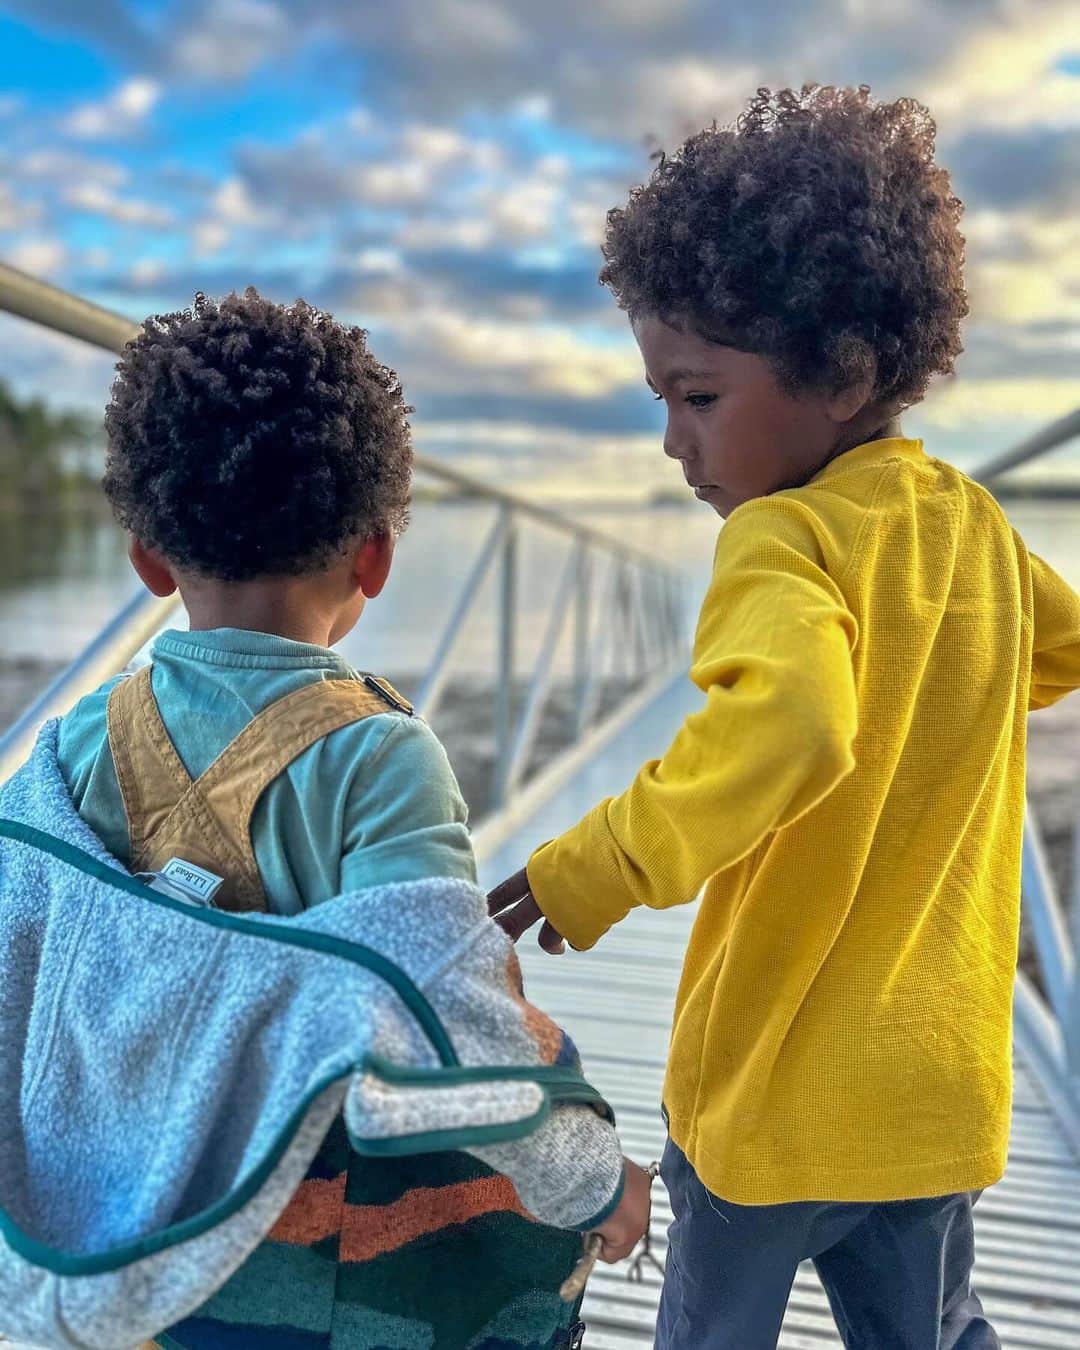 L.L.Beanのインスタグラム：「If you want a day that's filled with discoveries, take a page from #LLBeanAmbassador @troy_brooks' book and visit a beach with kids! It's amazing what little eyes and hands will see and find that we might overlook. #BeanOutsider」